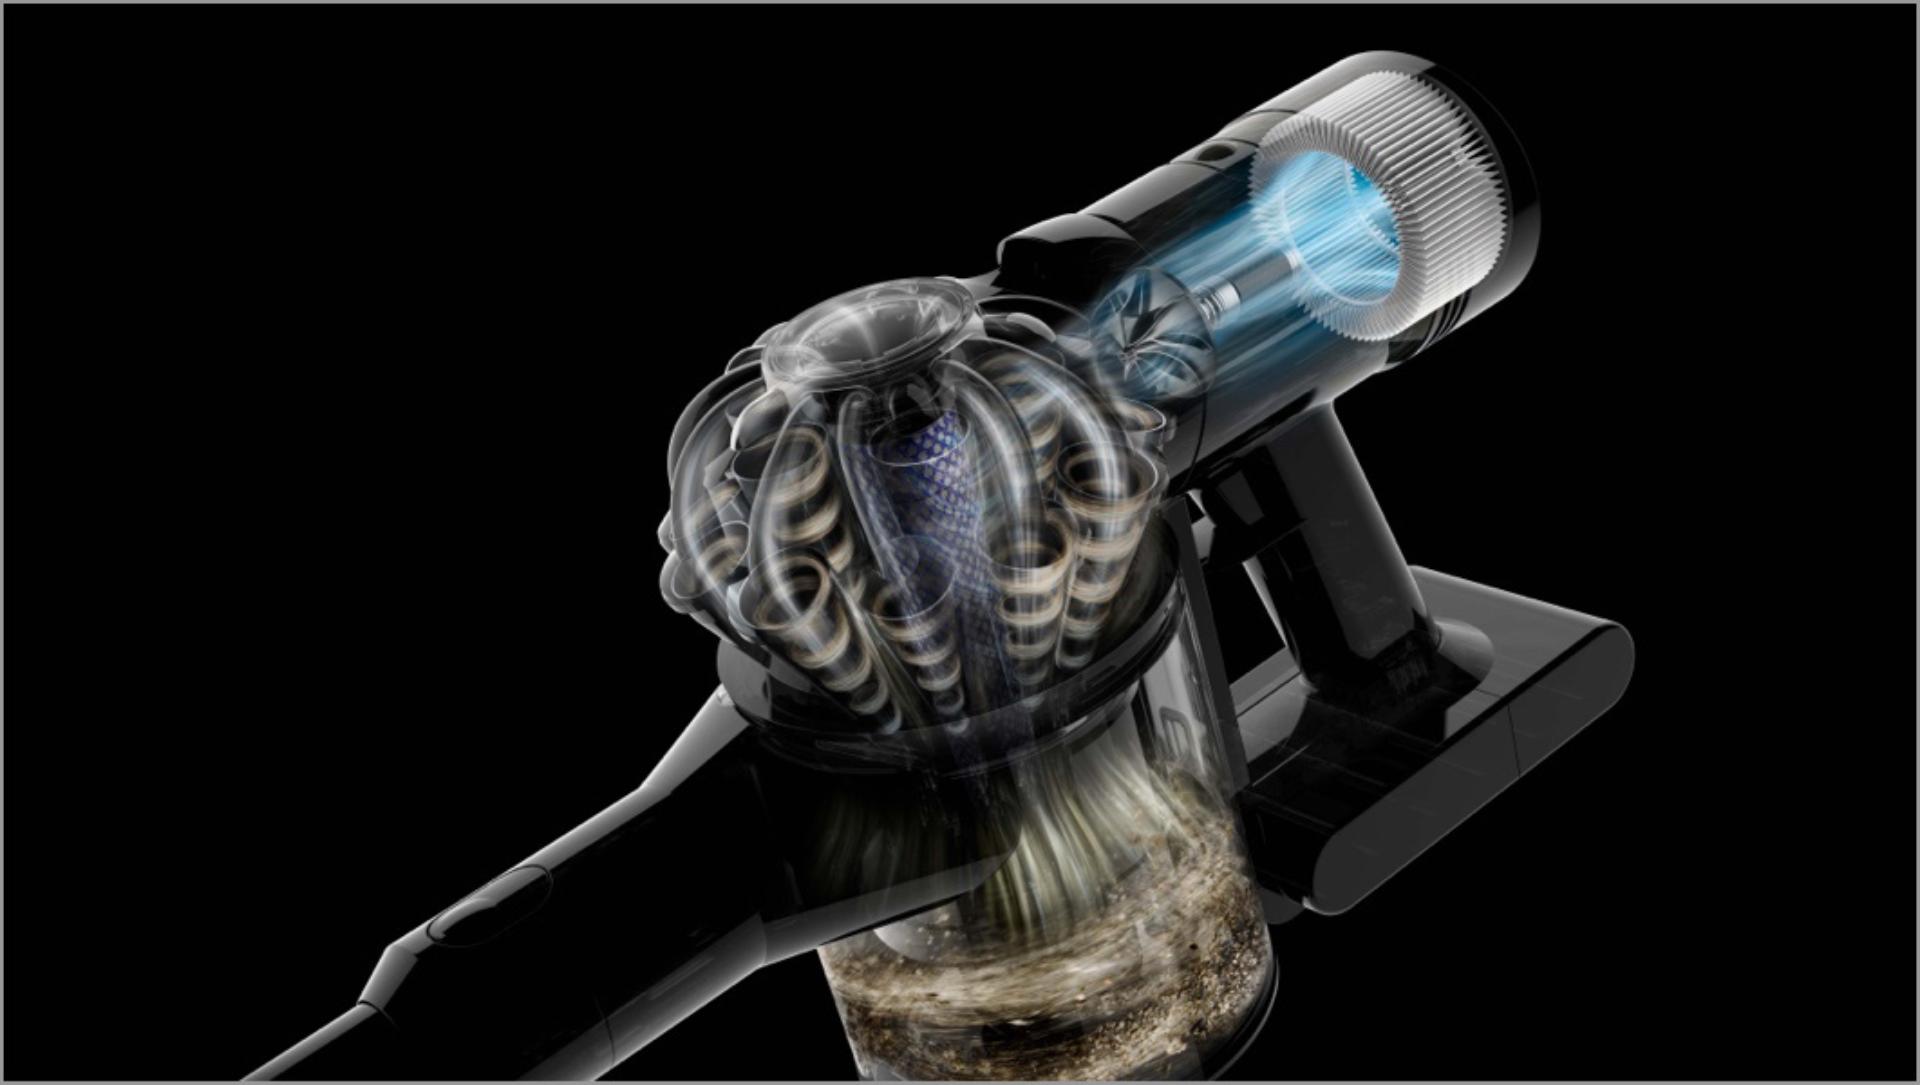 Xray of inner workings of Dyson V7 motor and streamlined airways